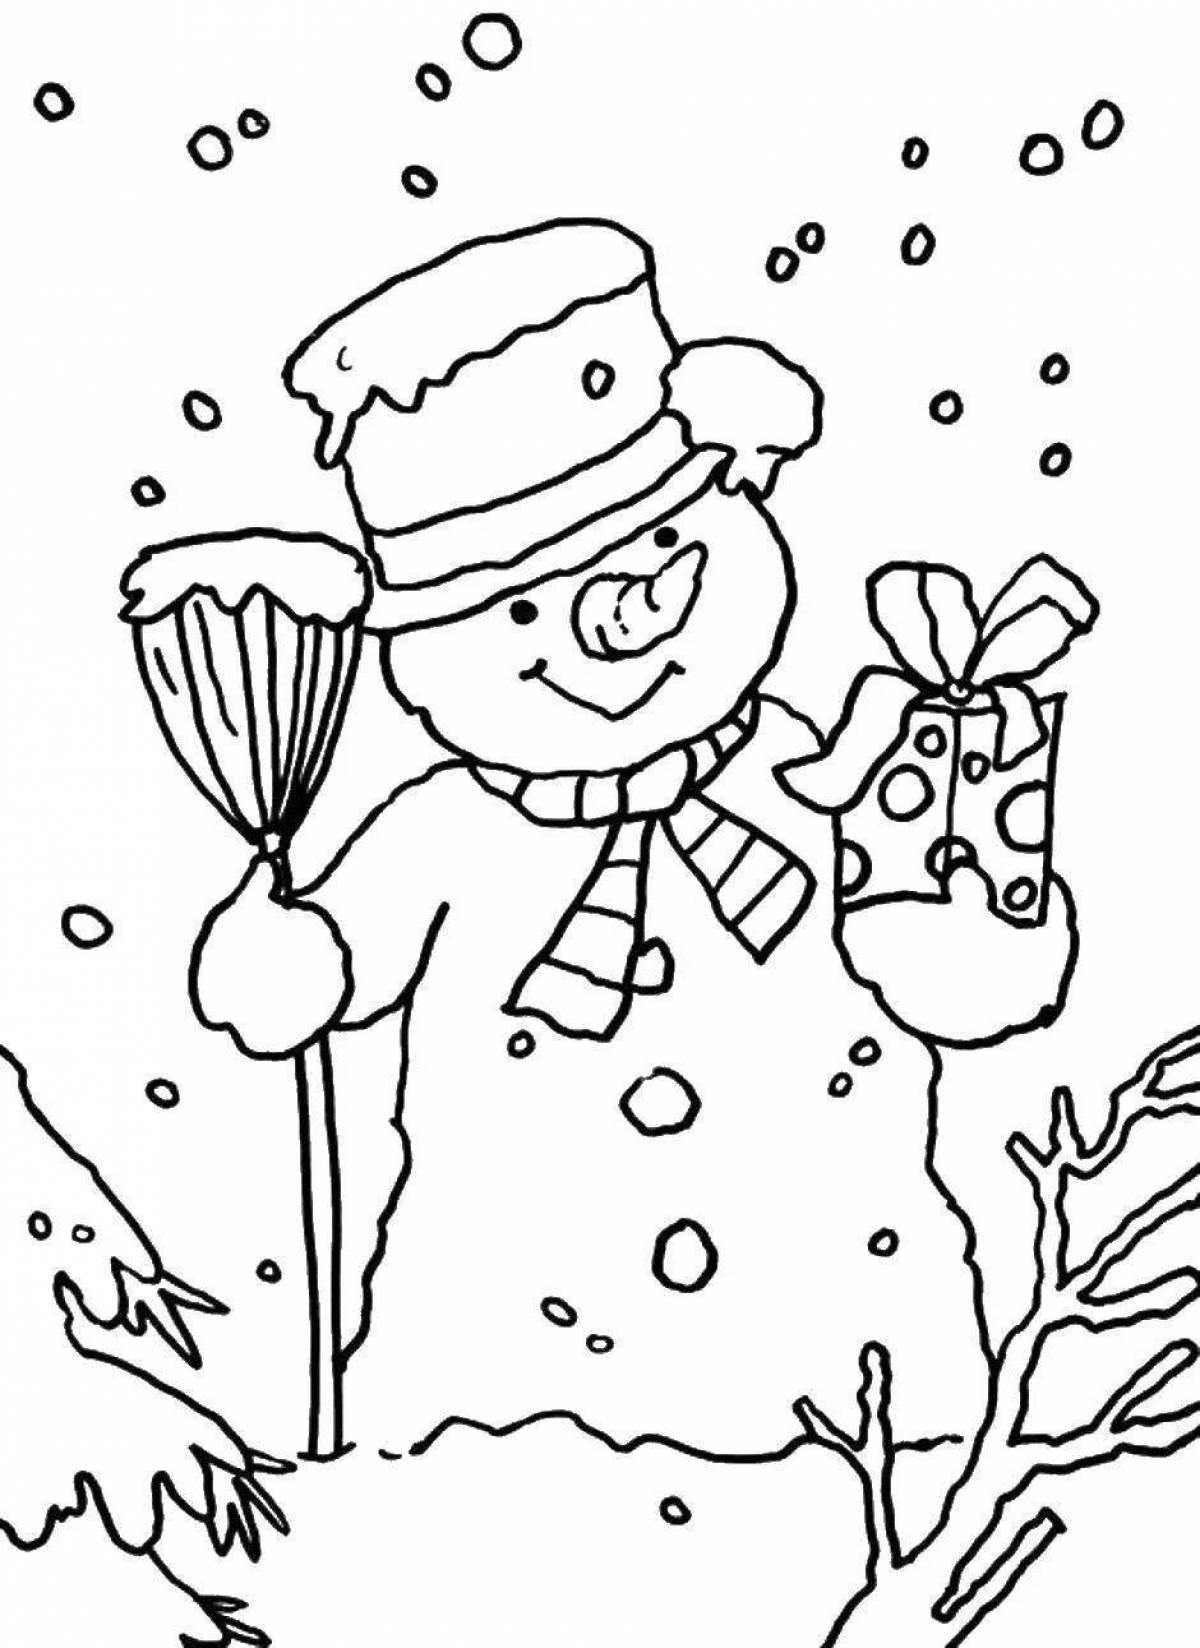 Children's Generous Snowfall Coloring Pages